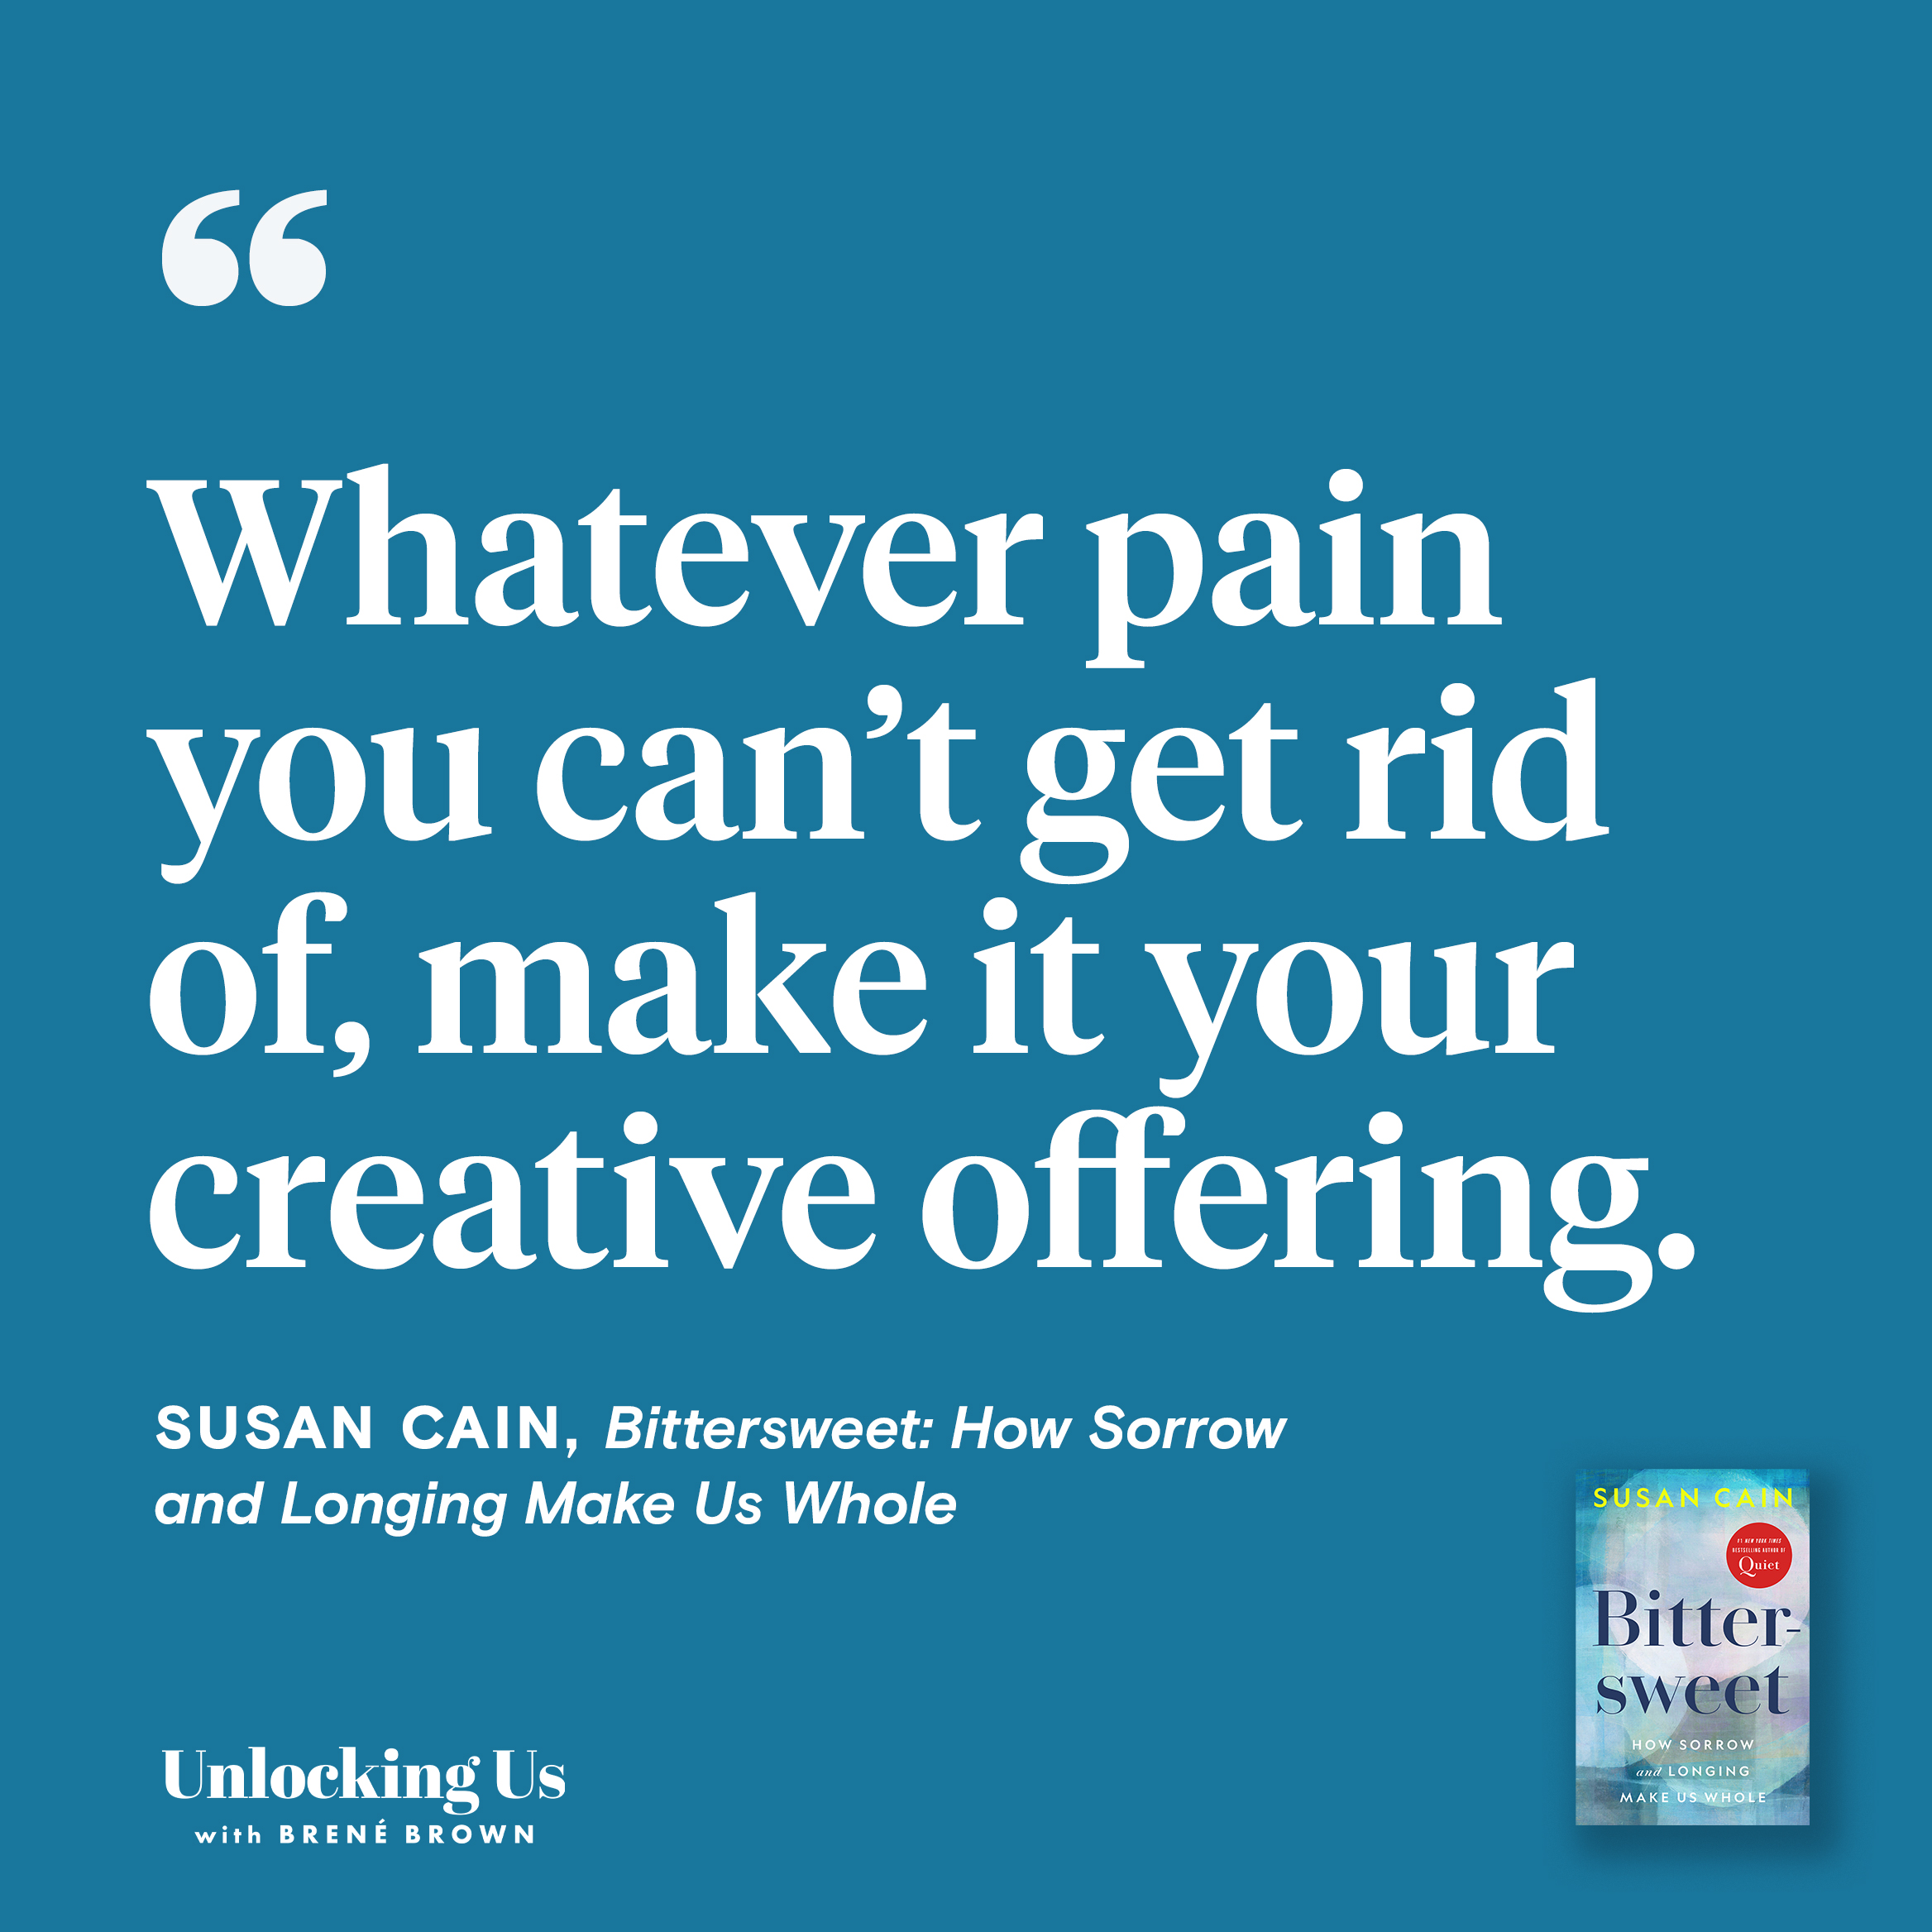 Whatever pain you can't get rid of, make it your creative offering. By Susan Cain, author of Bittersweet: How Sorrow and Longing Make Us Whole